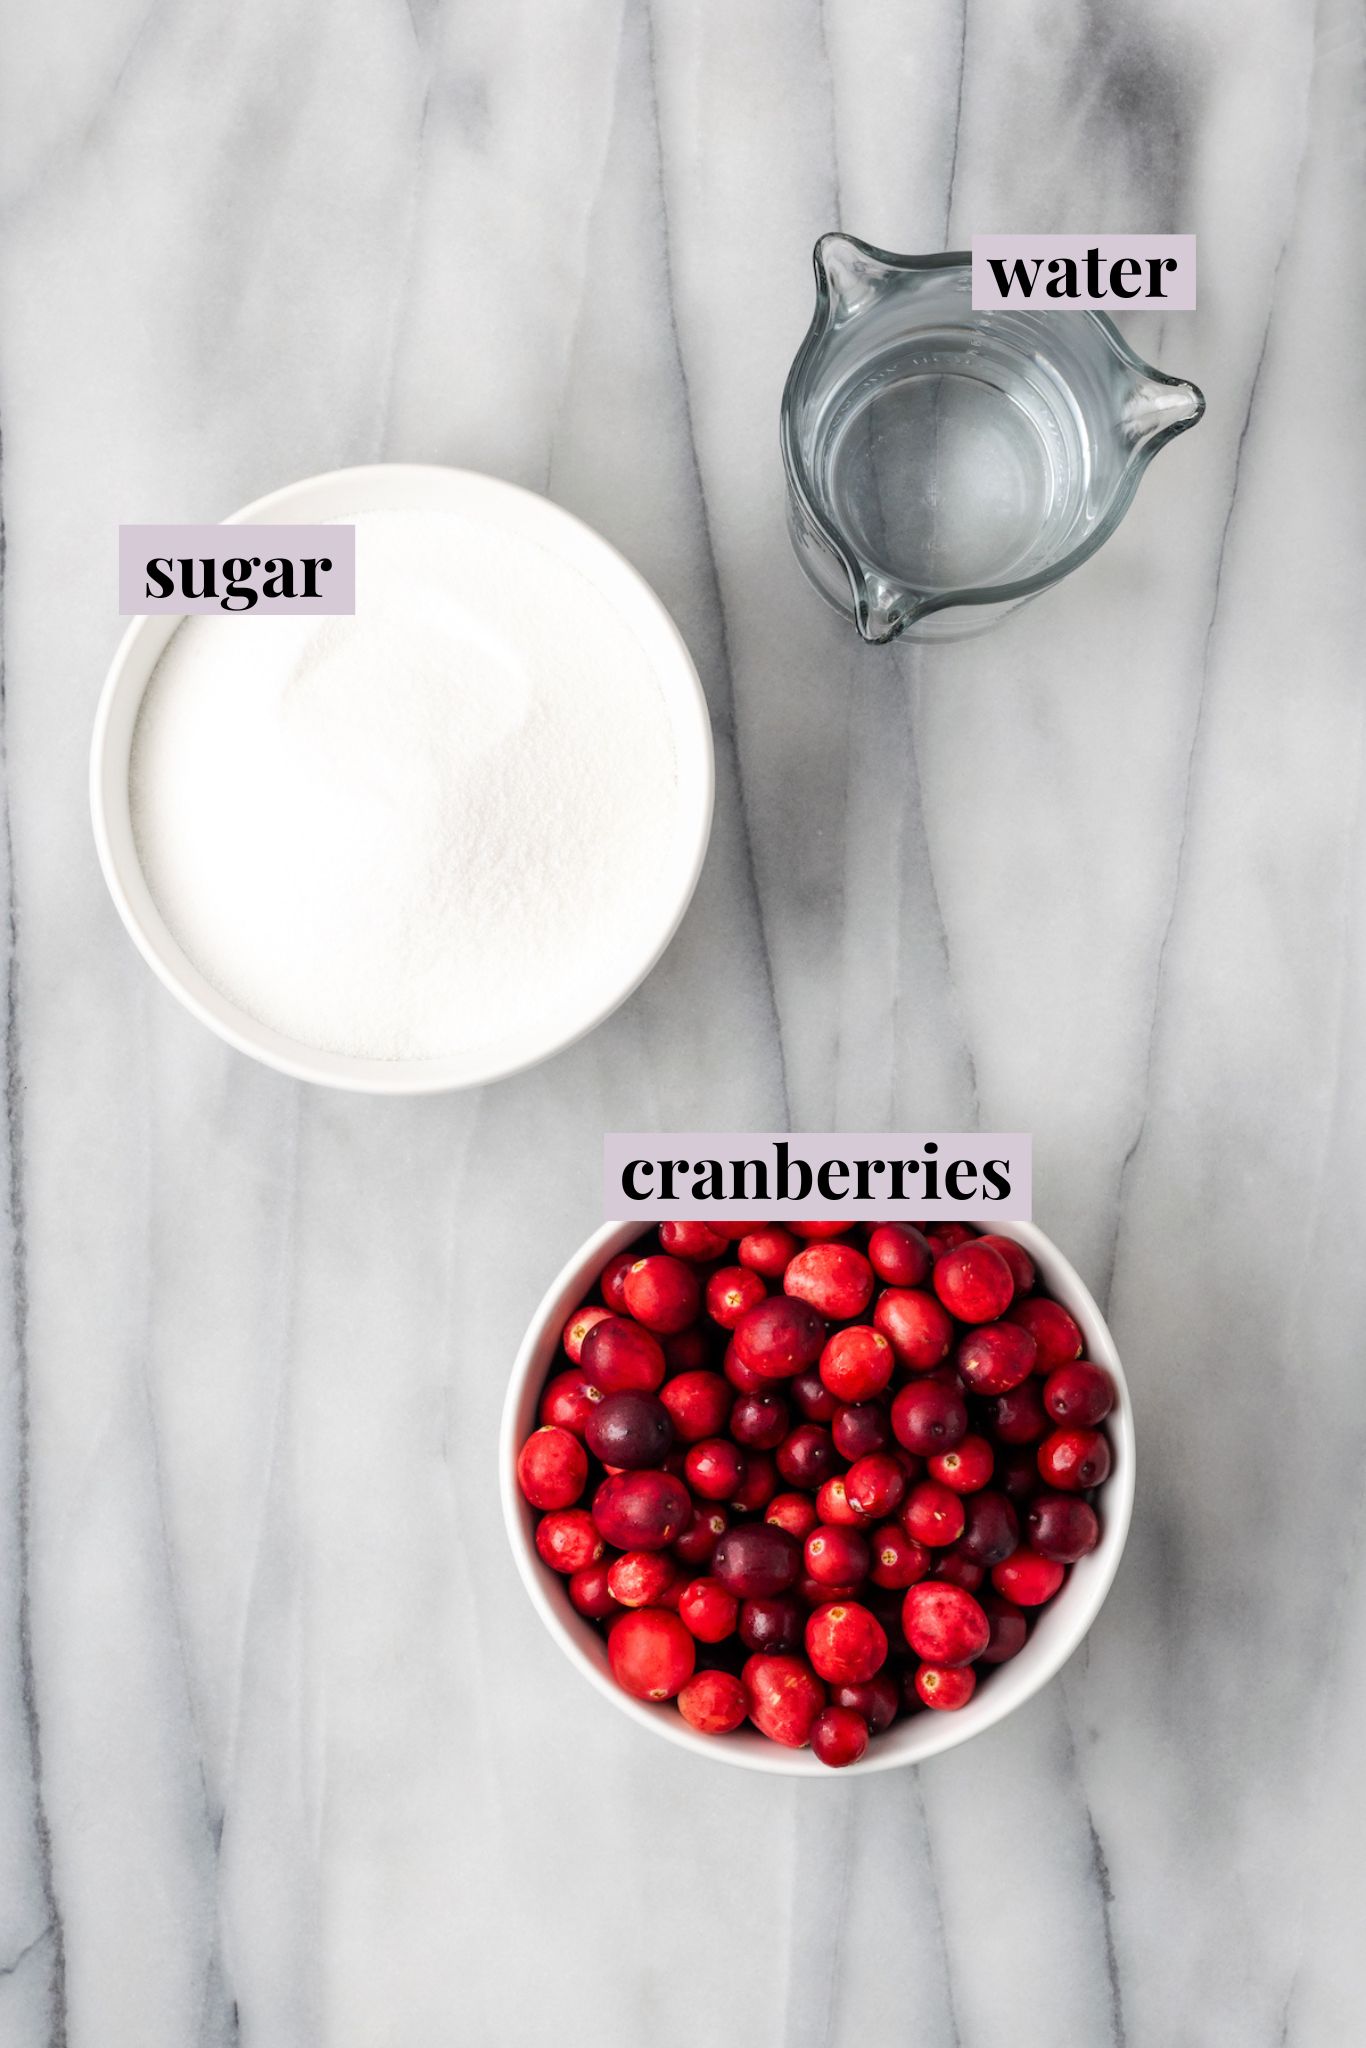 Overhead view of ingredients for sugared cranberries with labels